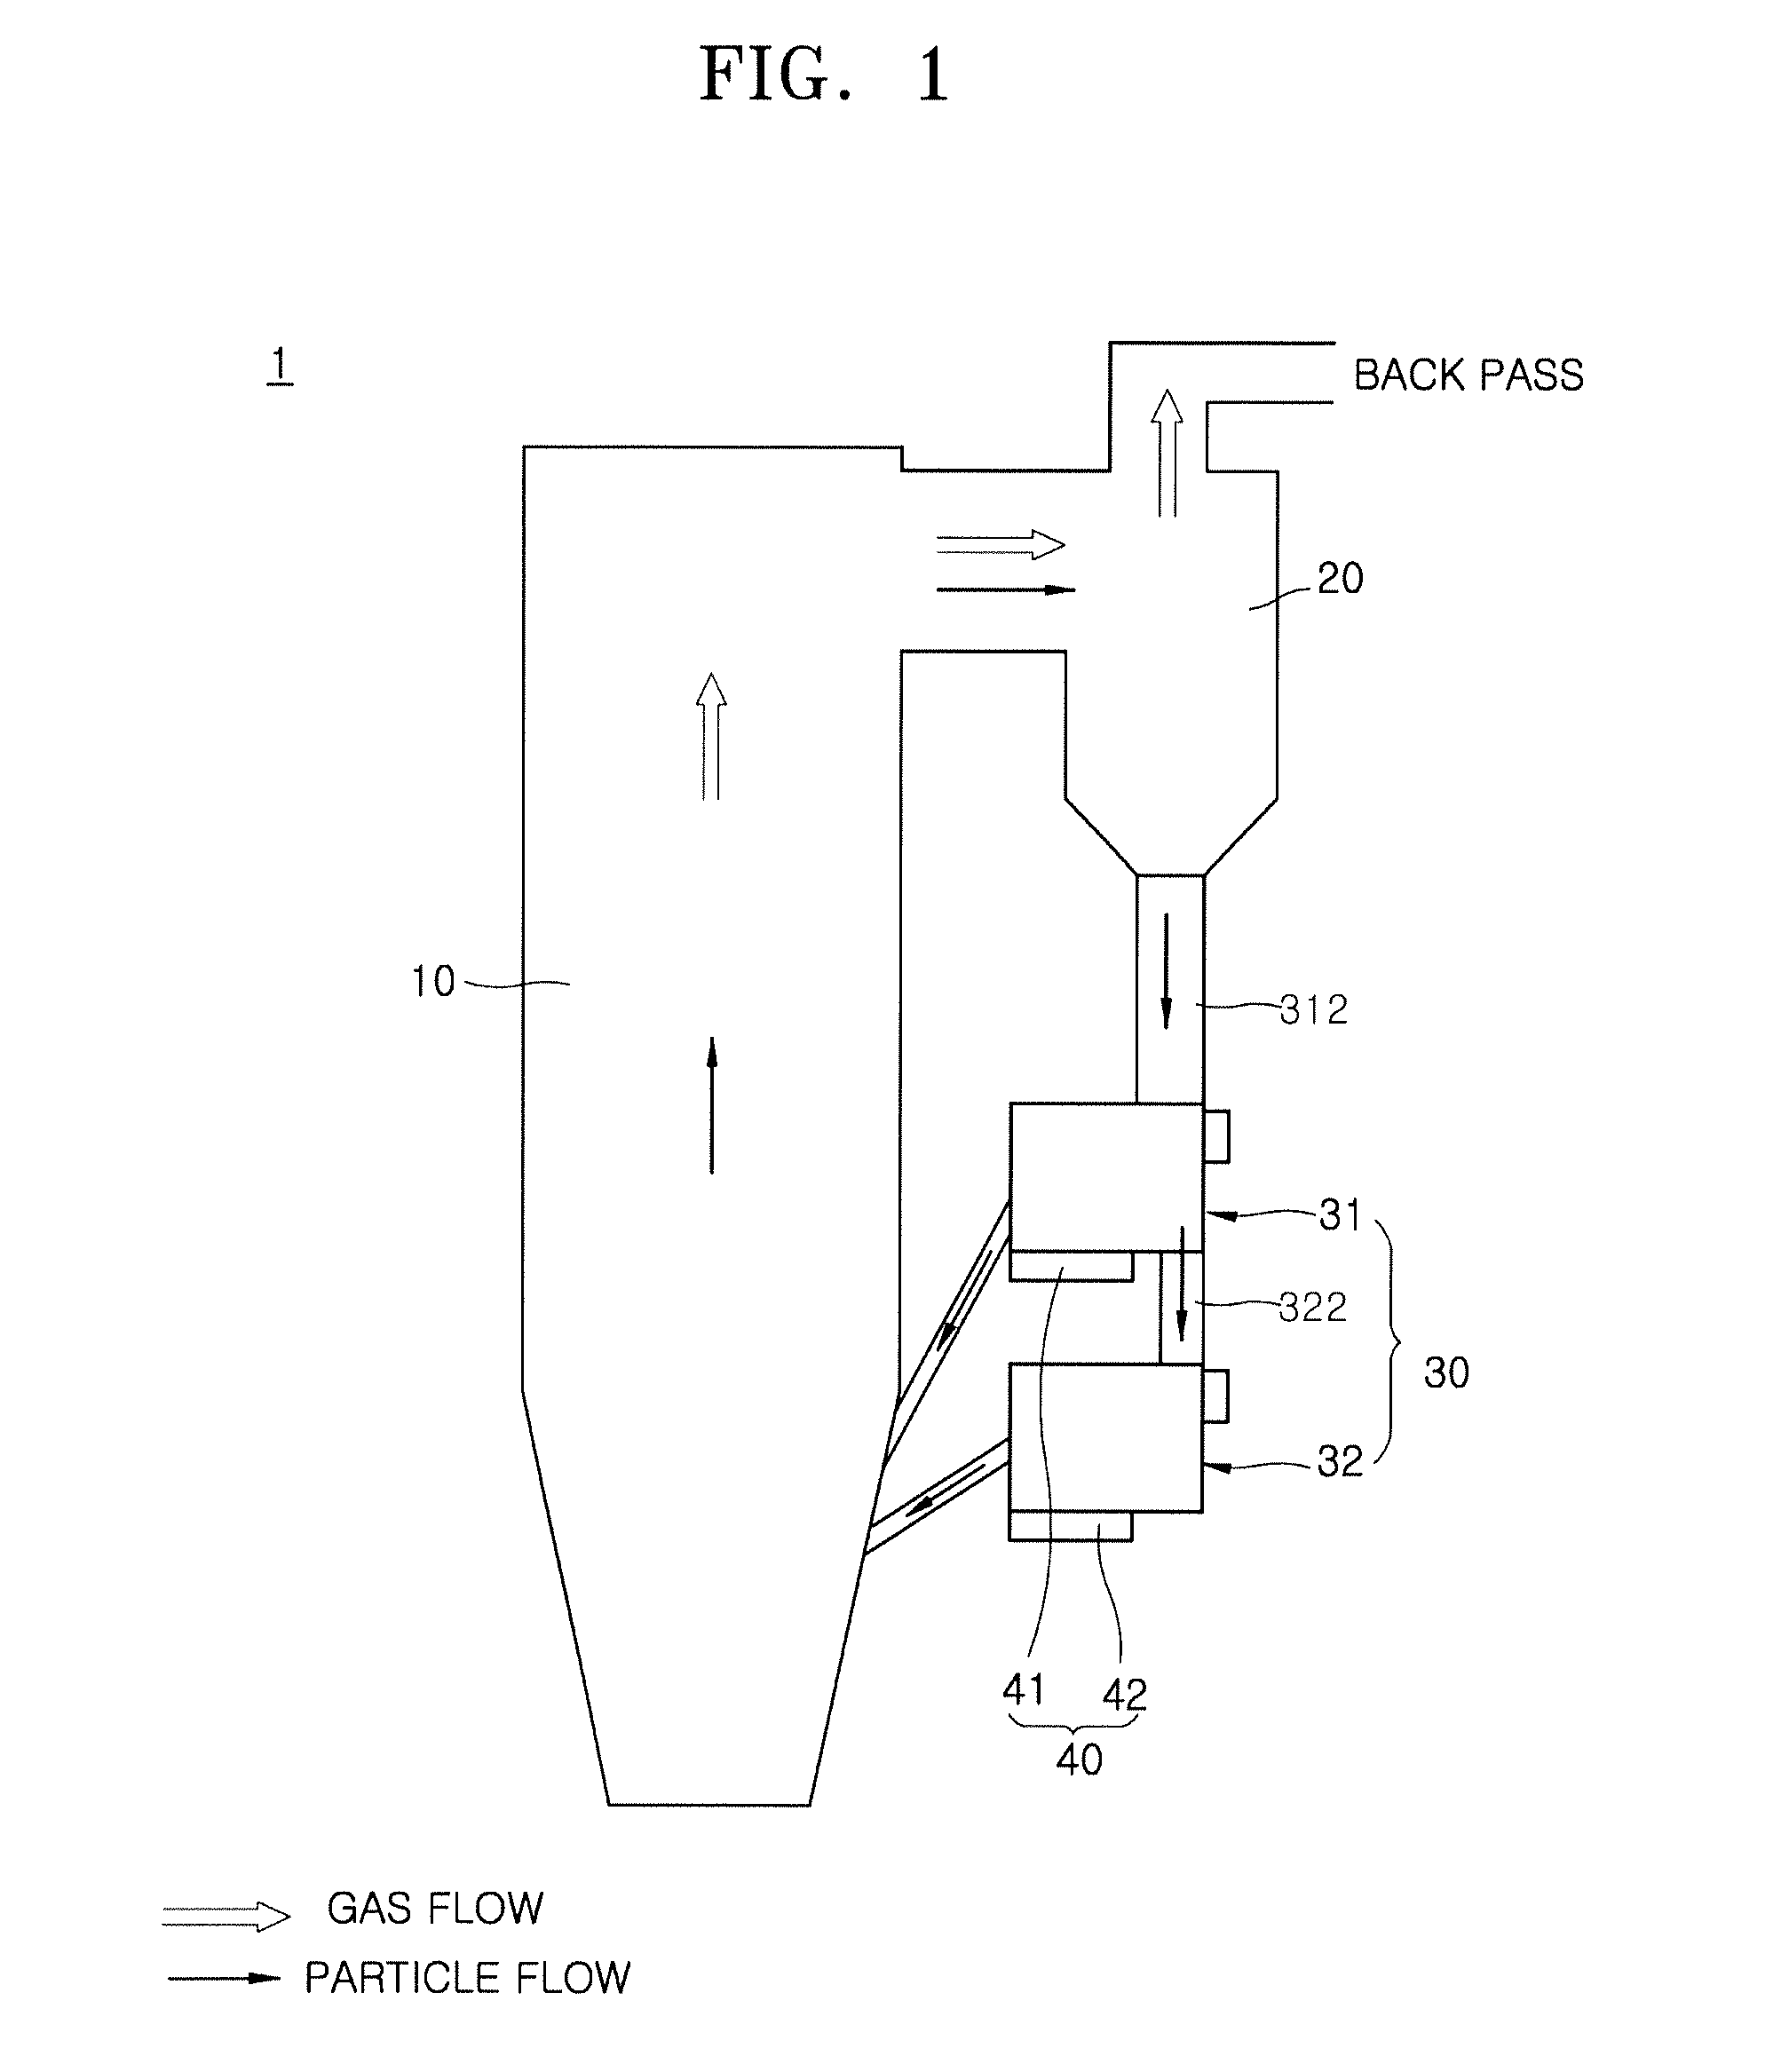 Heat exchange apparatus for circulating fluidized bed boilers